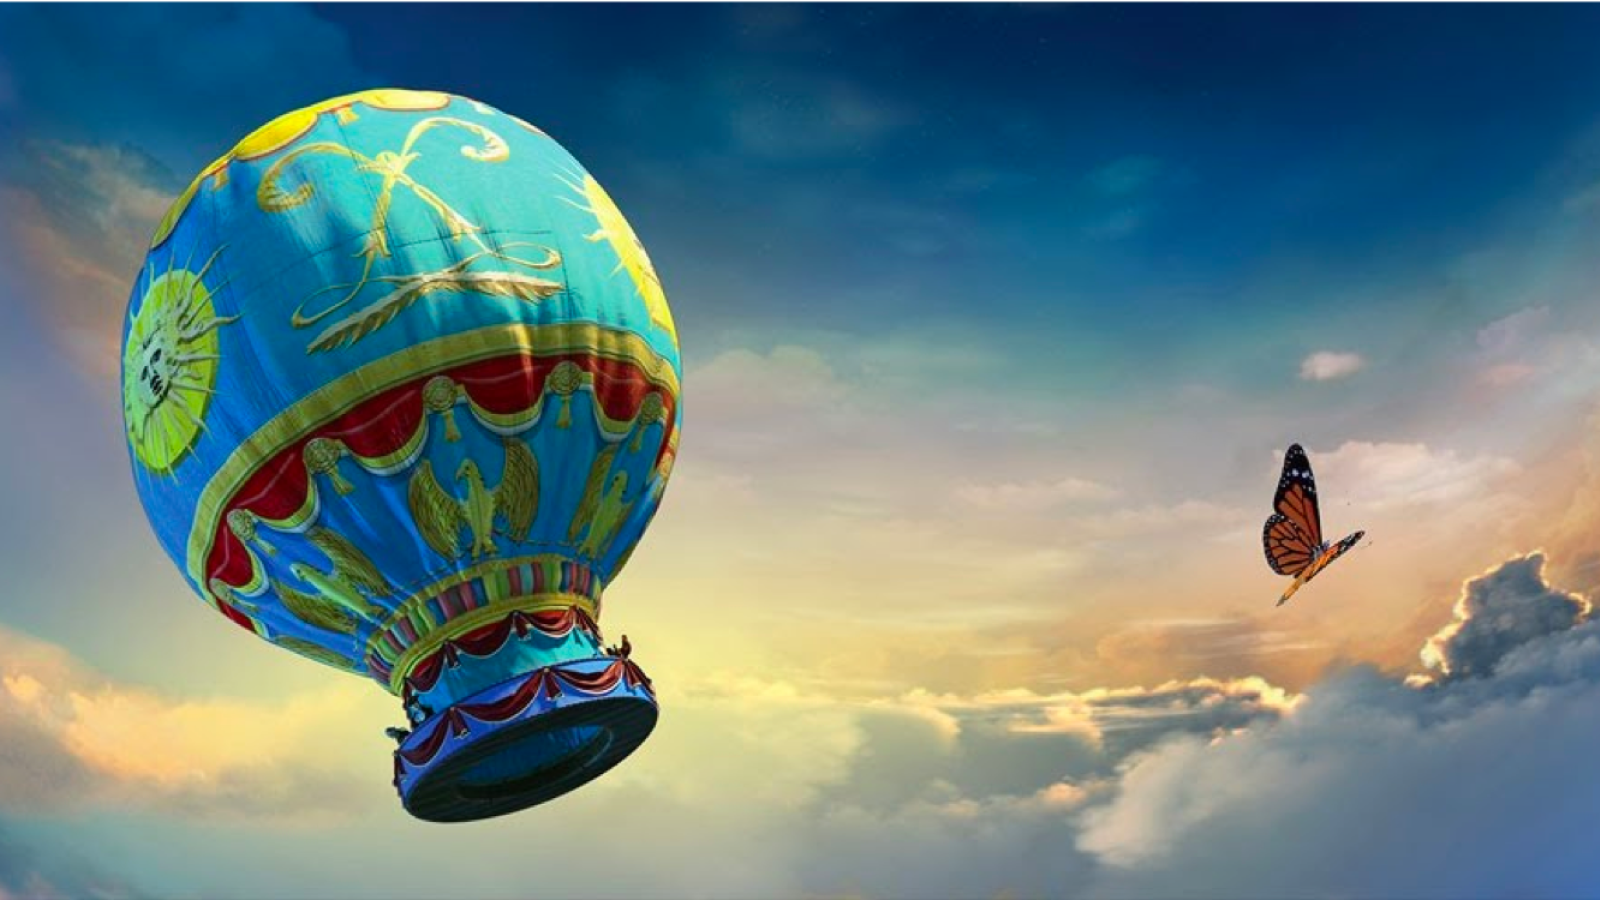 Still images of the film with hot air balloon, butterfly and dragon fly